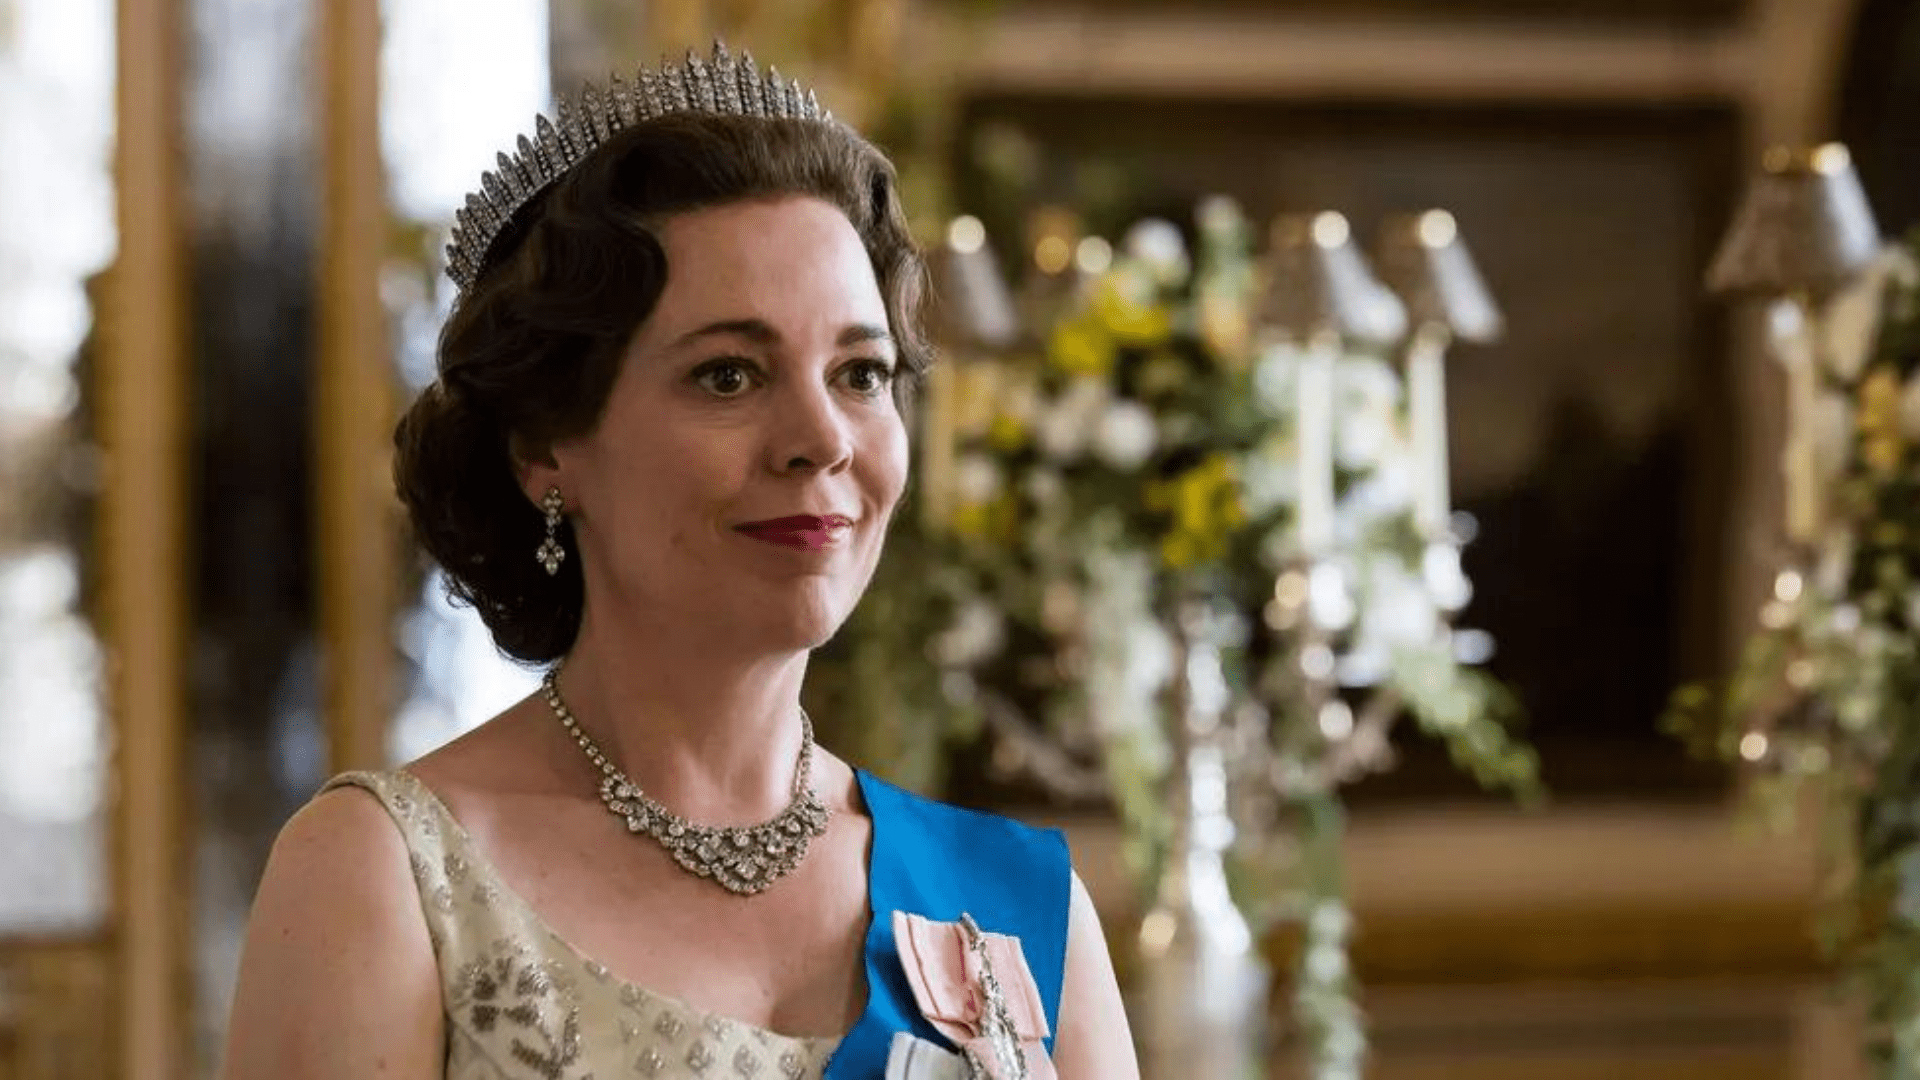 The Crown Netflix Facts - 31 Facts About The Crown On Netflix You Haven't Read Before